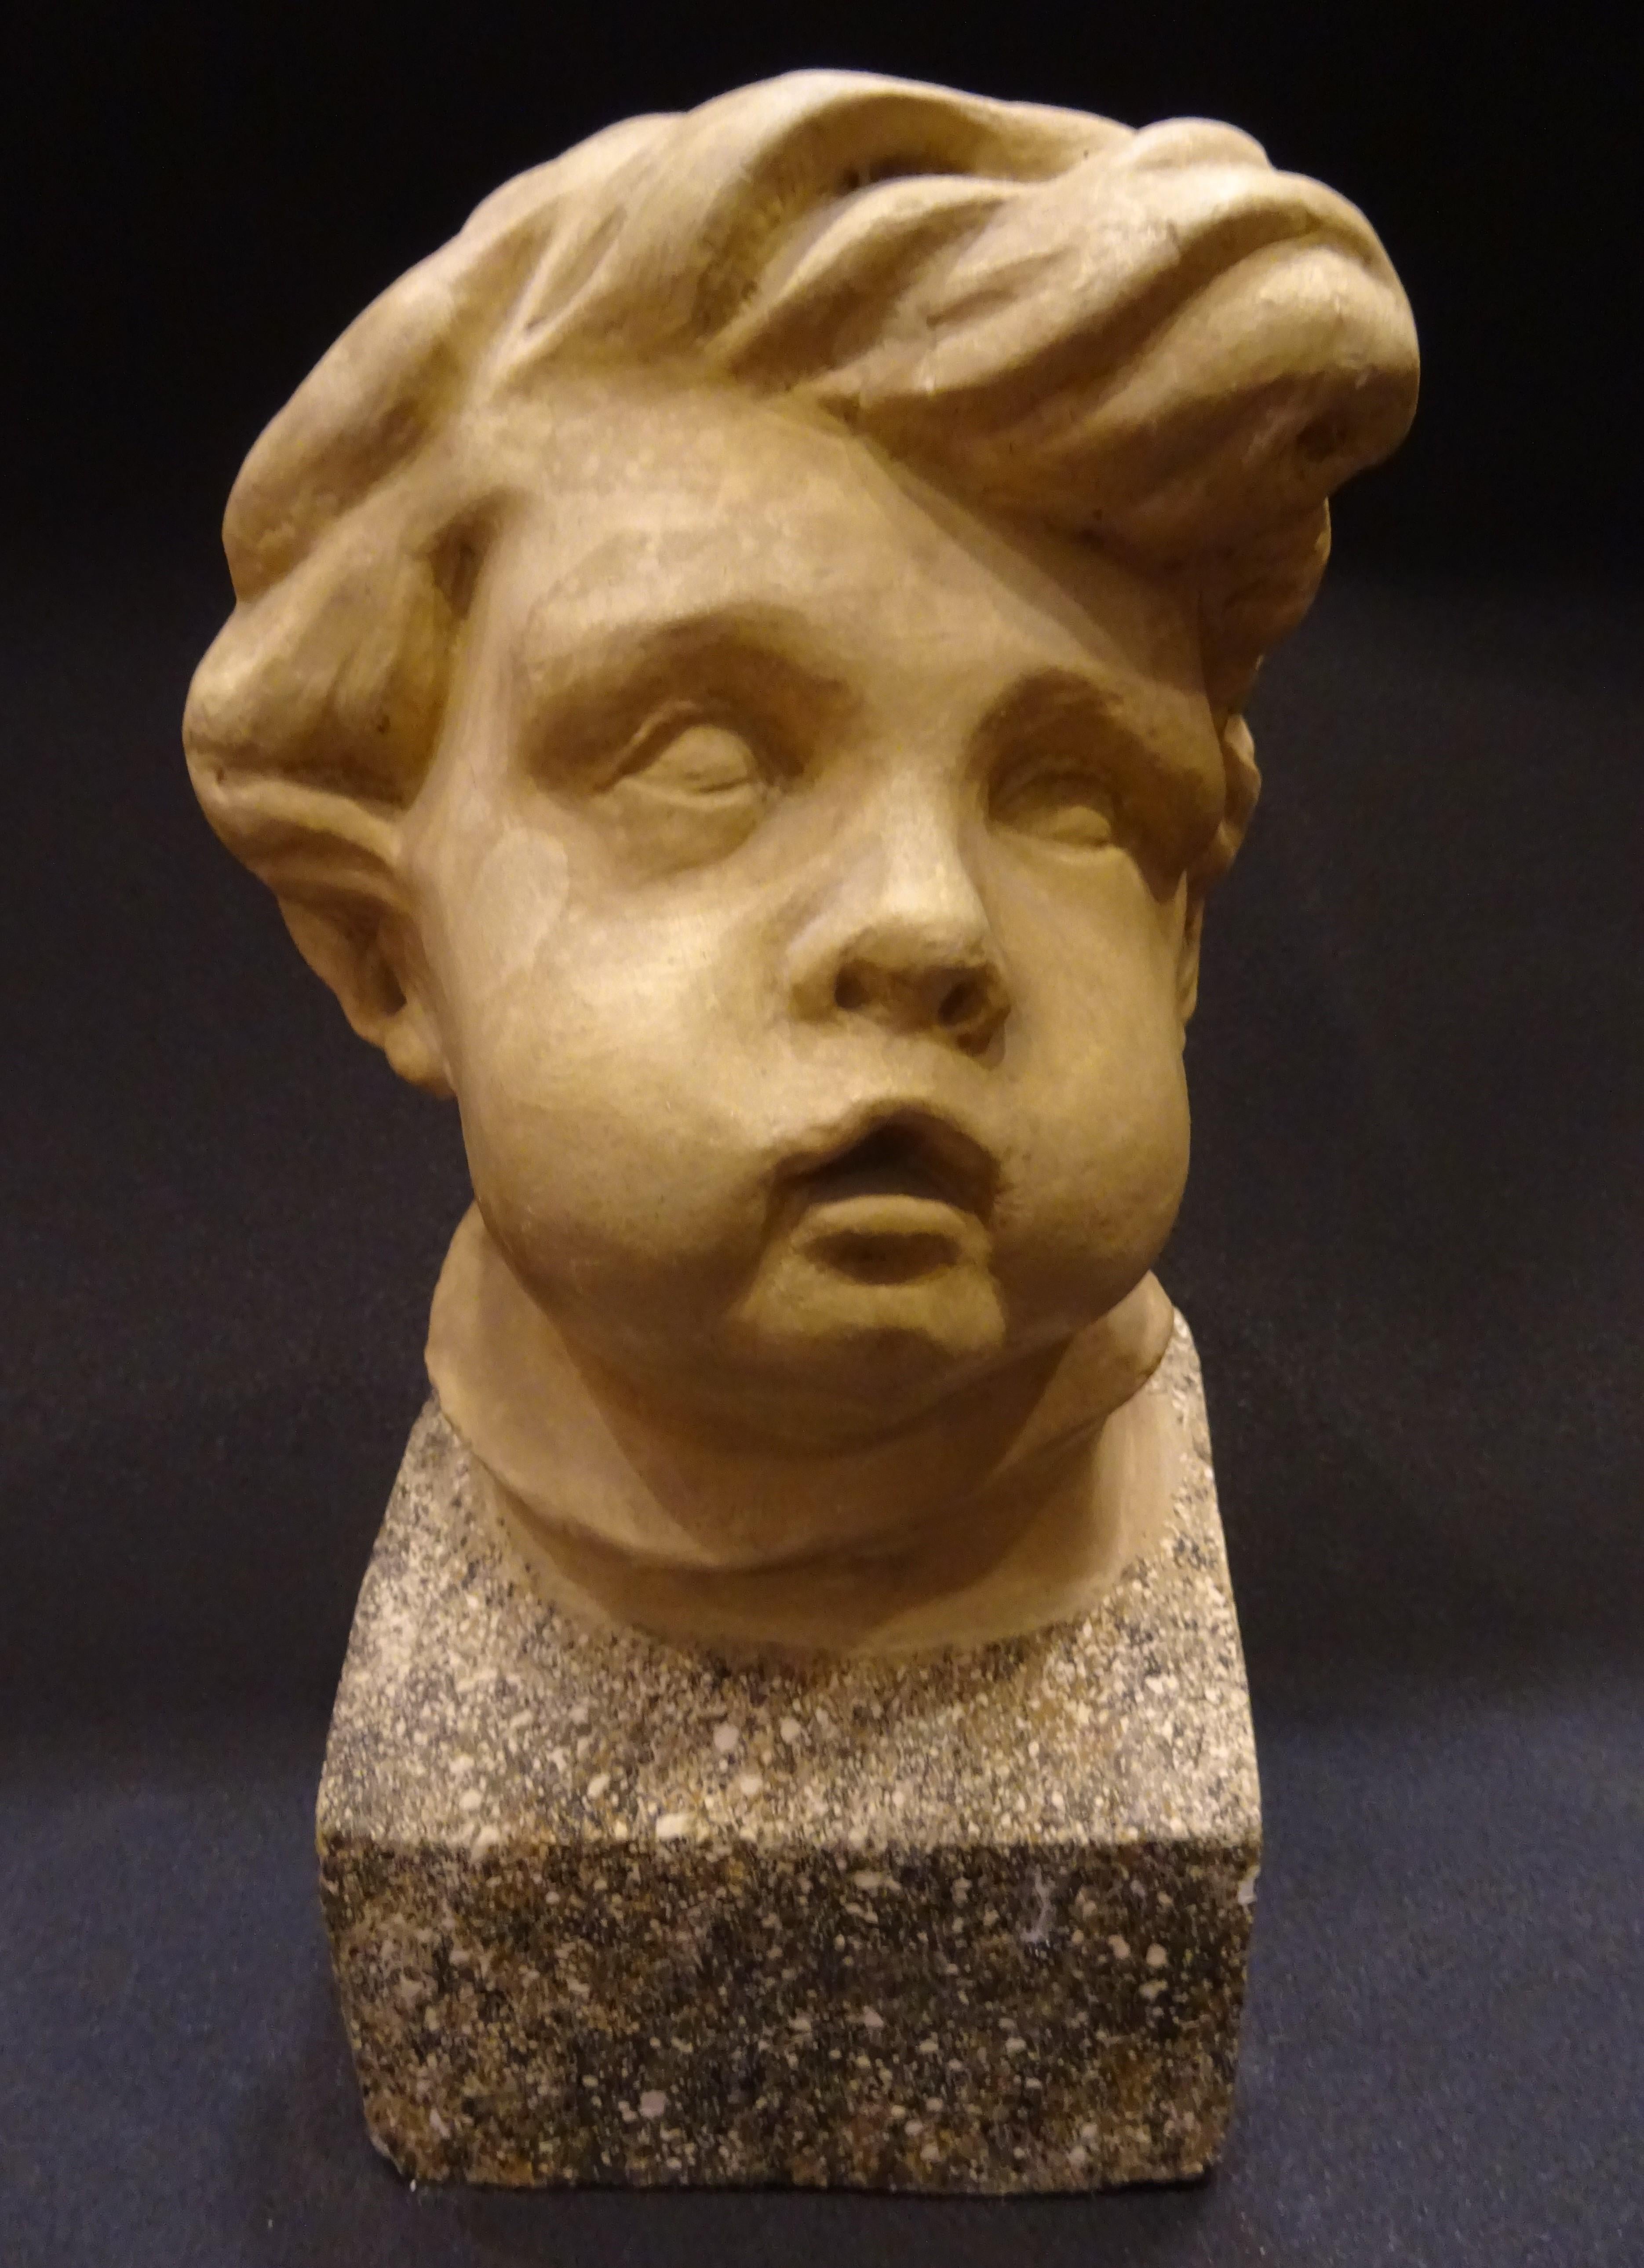 Beautiful plaster carved child bust, circa 1910, academicist, French school.
They used to be used in artistic academies as models to paint or to work on bronze or wood.
Its a very decorative piece and also a collector’s piece.
It’s suitable in a